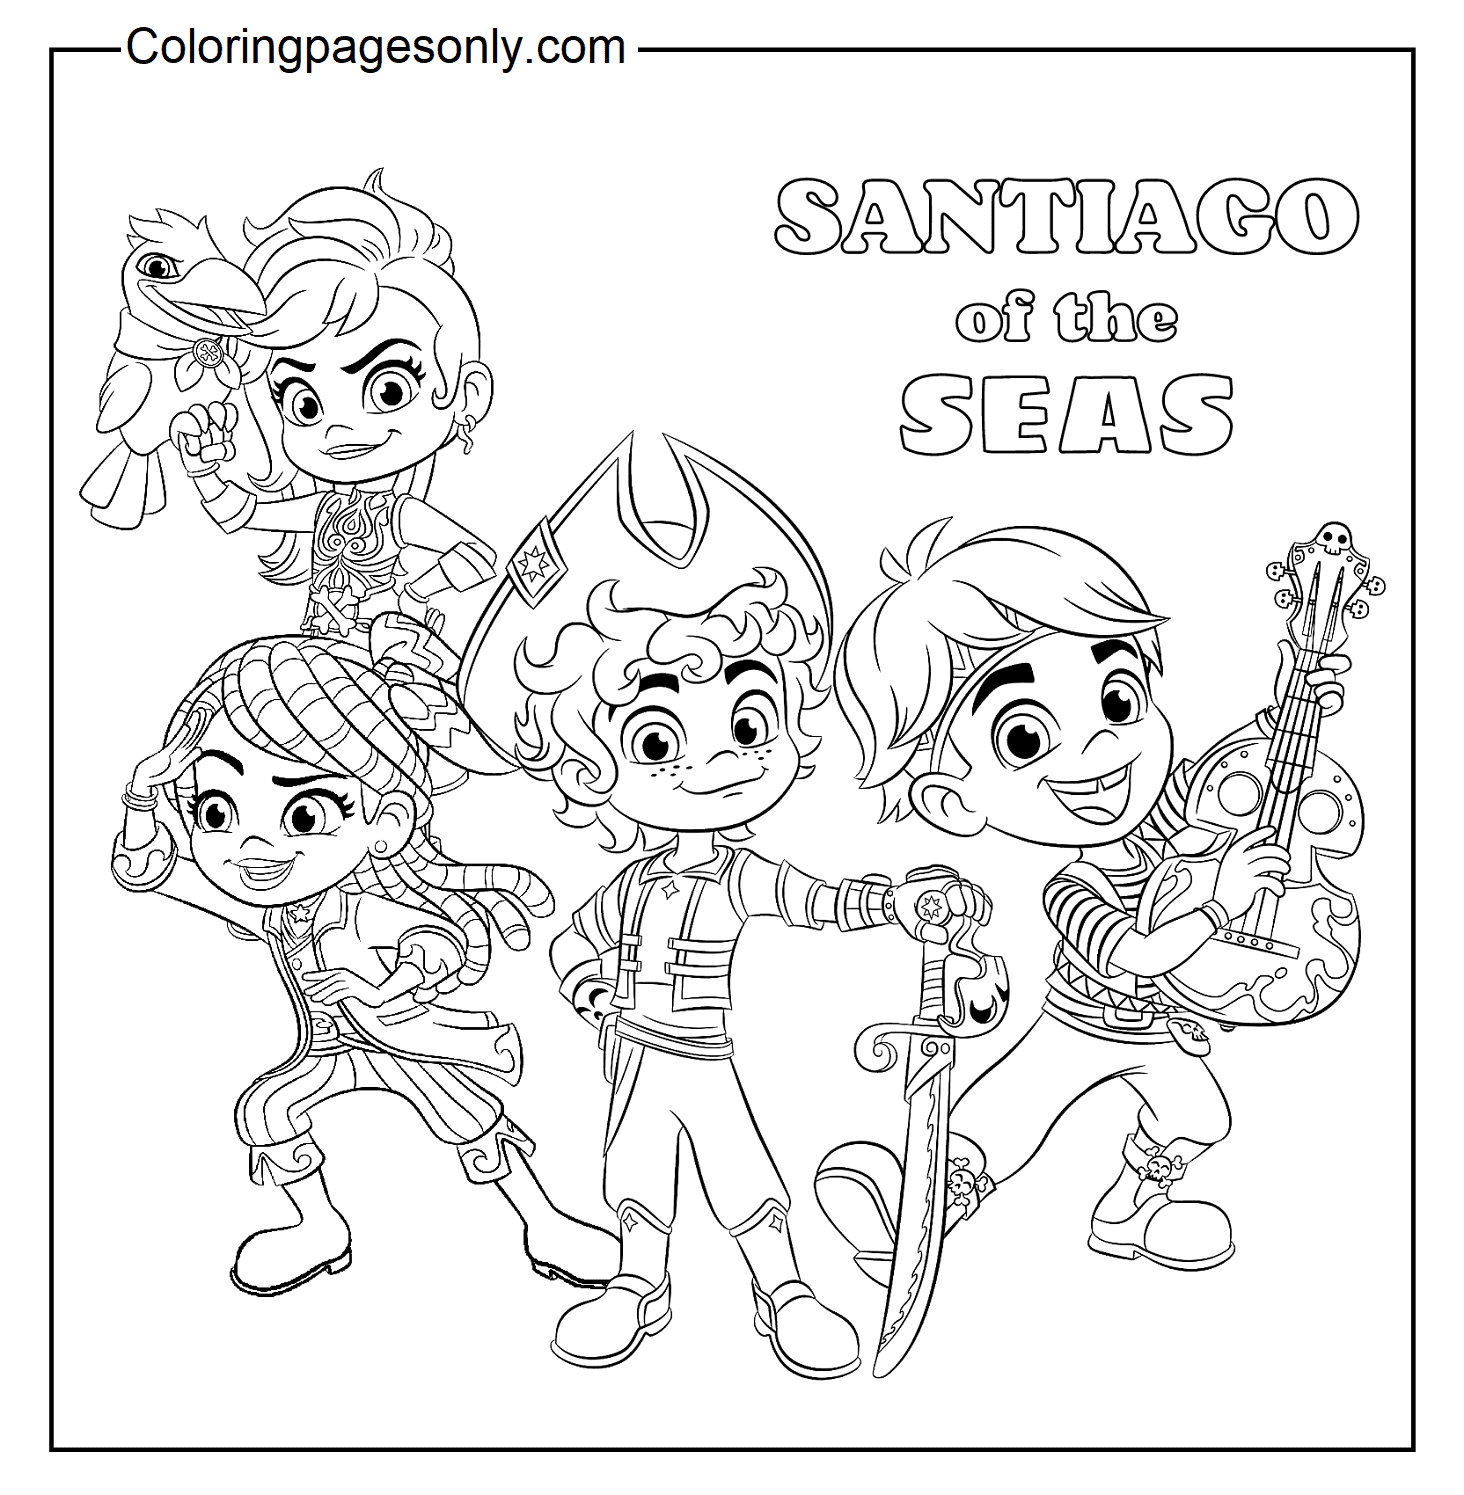 Free Printable Santiago of The Seas Coloring Pages - Santiago of the Seas  Coloring Pages - Coloring Pages For Kids And Adults